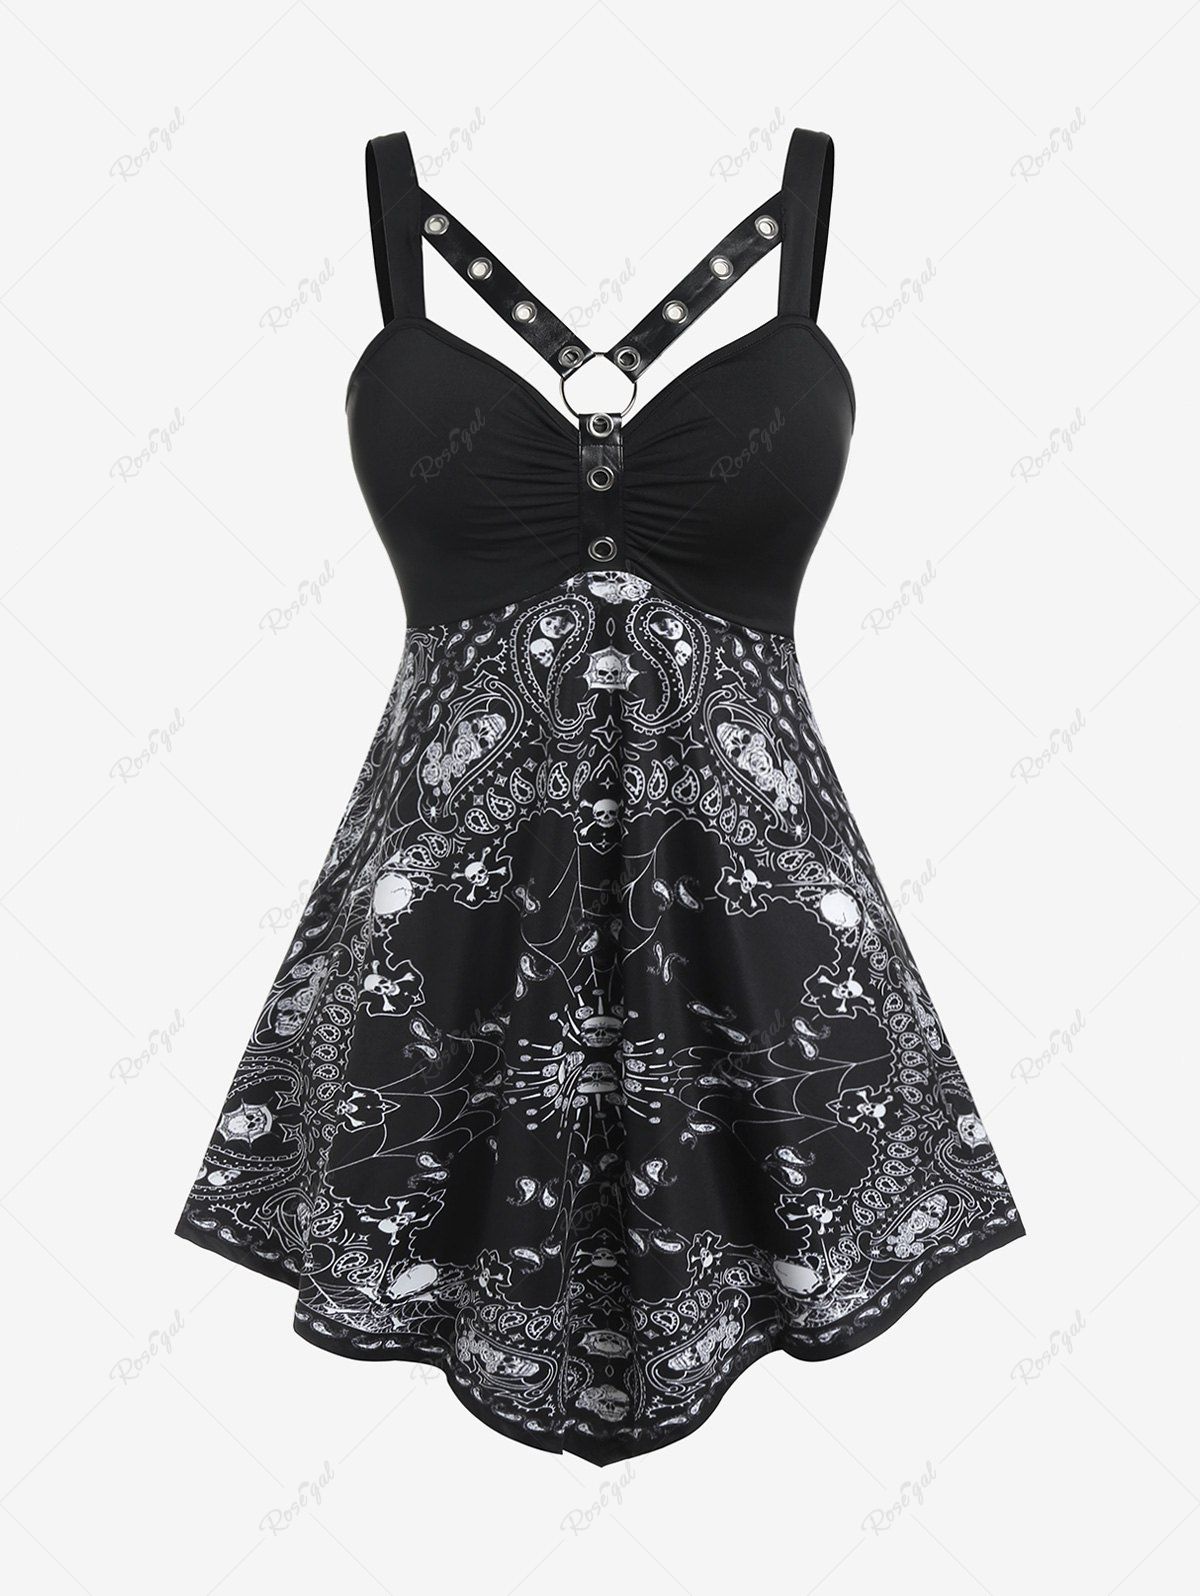 Affordable Plus Size Paisley Skull Print Harness Gothic Tank Top  